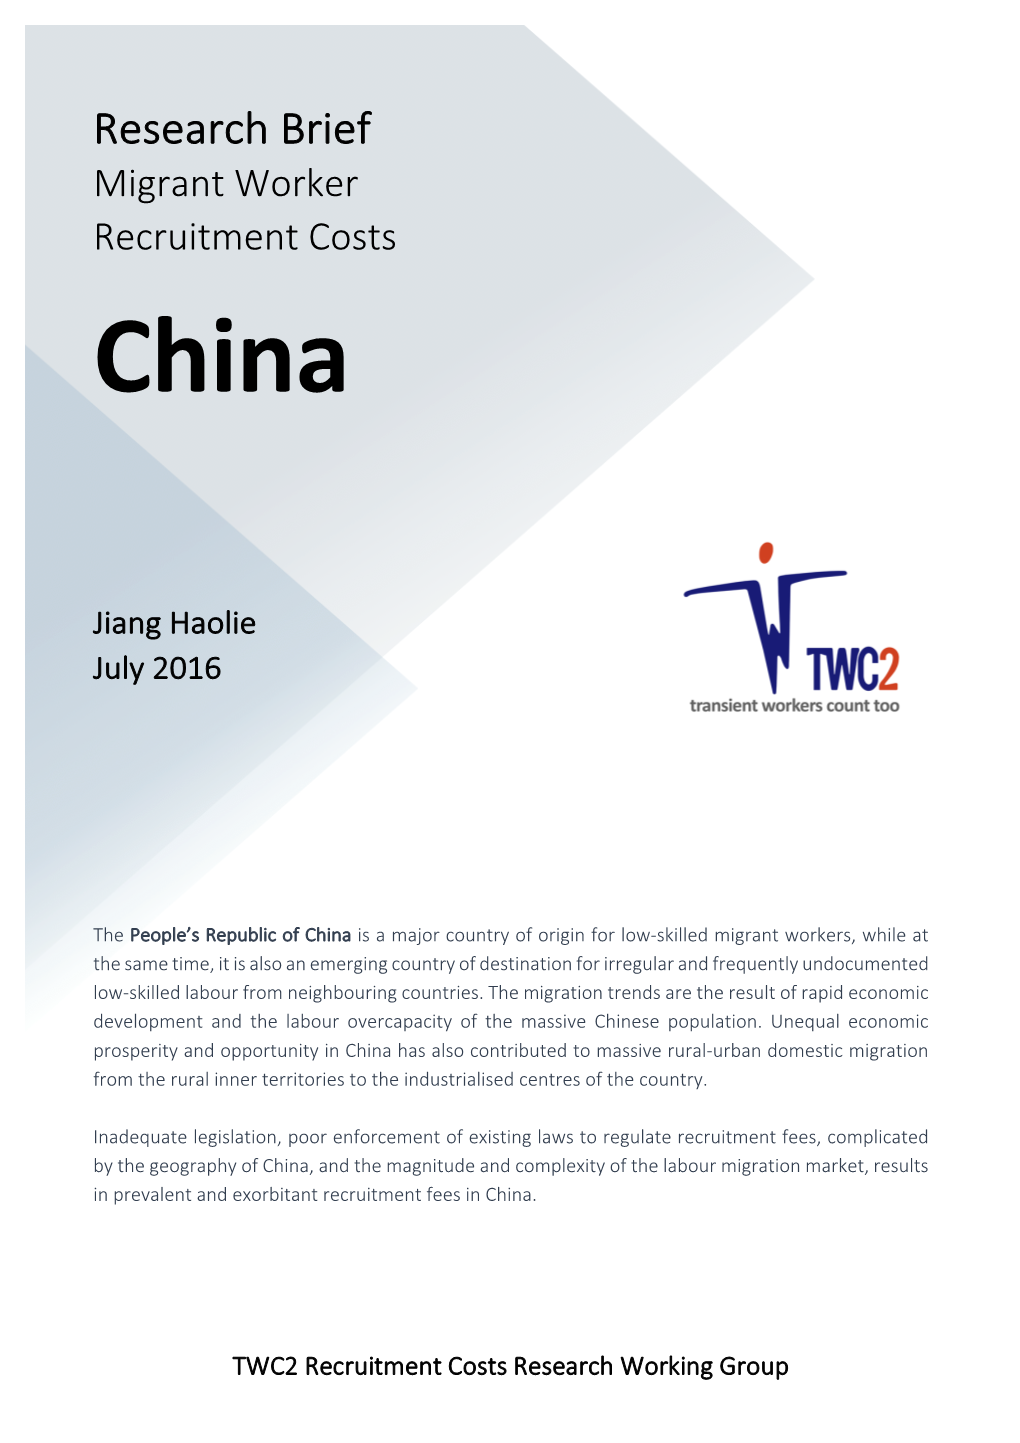 TWC2: Migrant Worker Recruitment Costs China (2016)